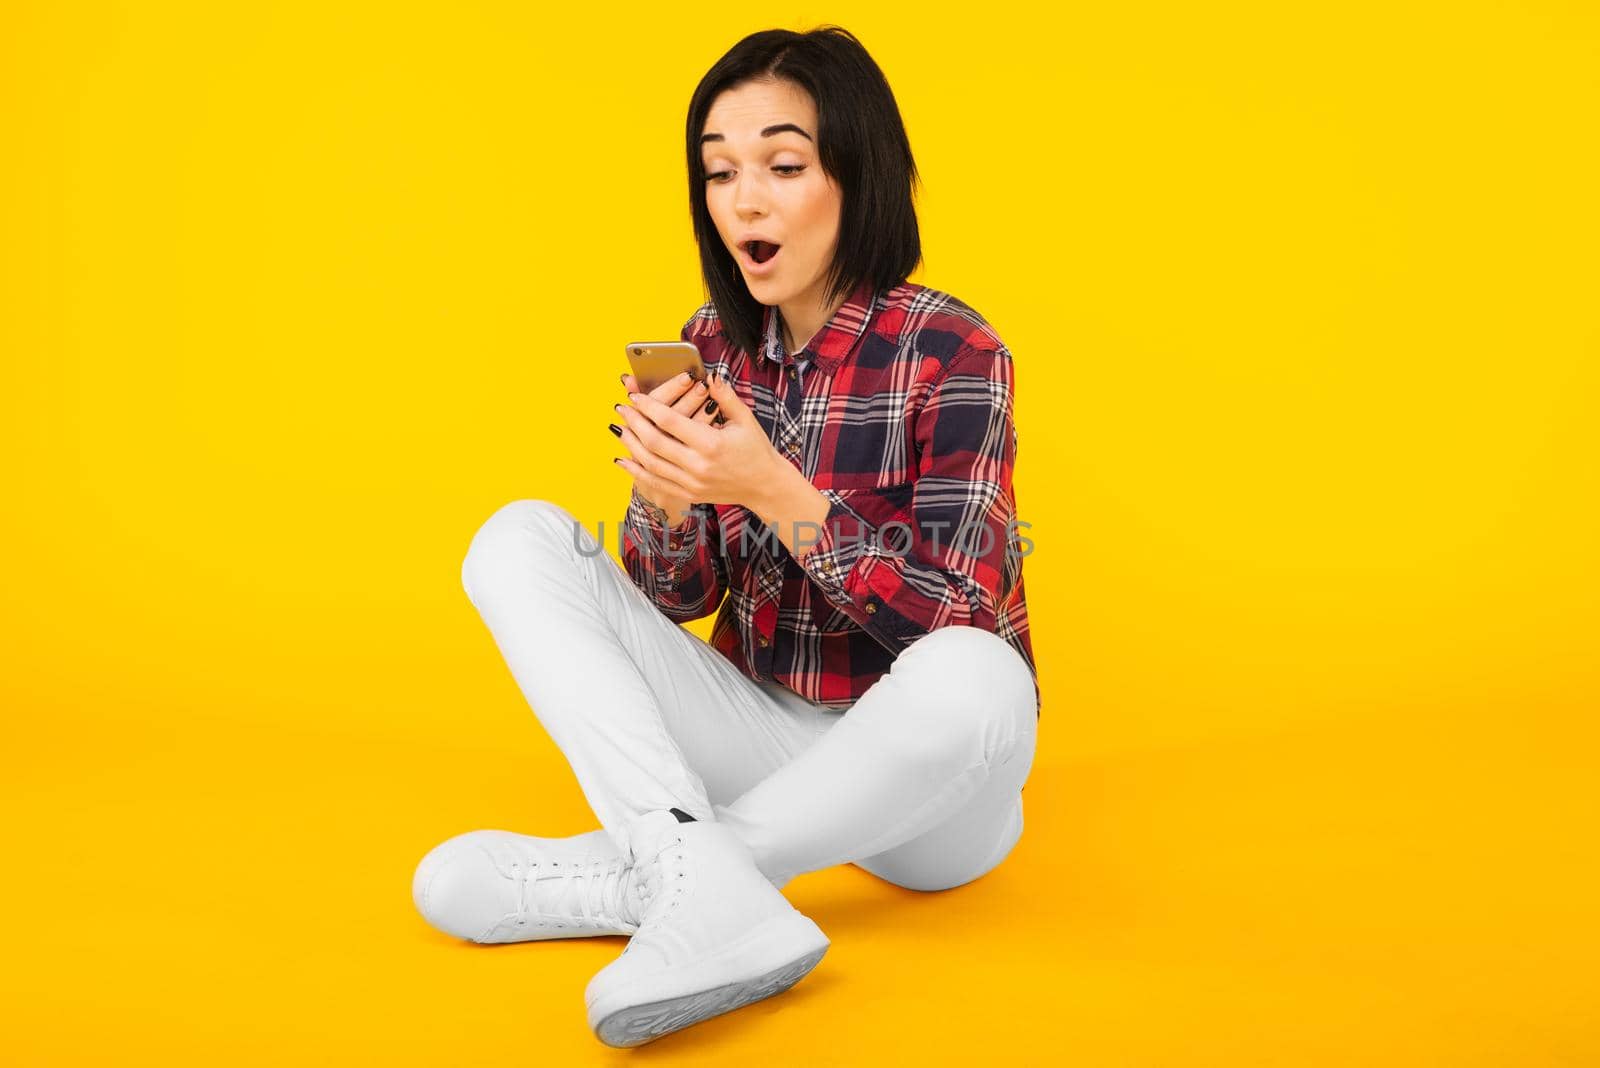 Excited laughing woman in plaid shirt sits and using mobile phone over yellow background - Image